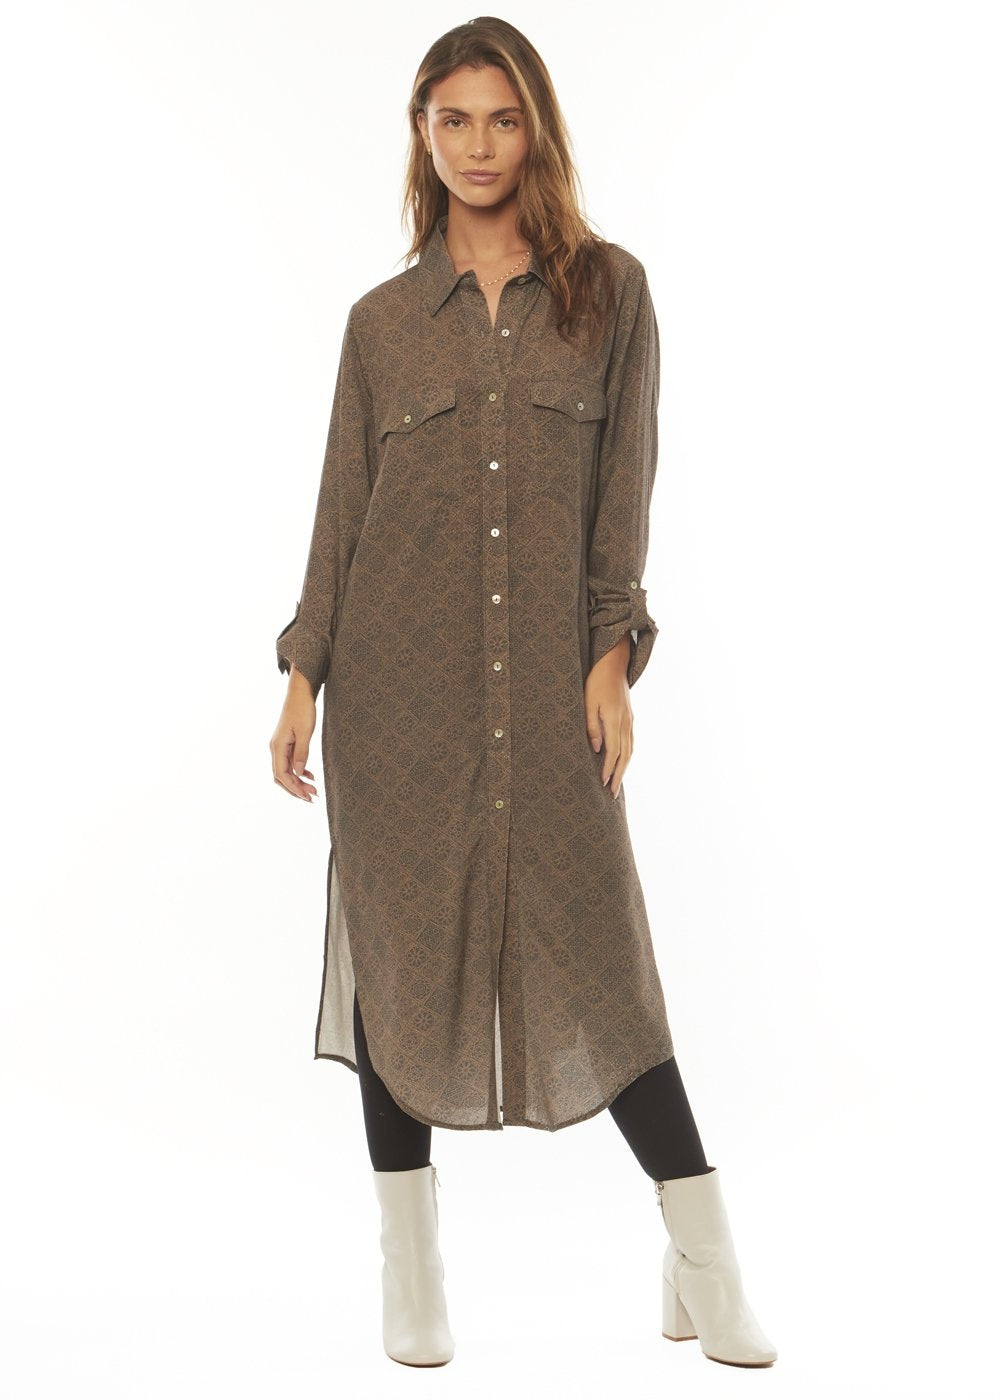 REMMY WOVEN LONG SLEEVE TUNIC TOP